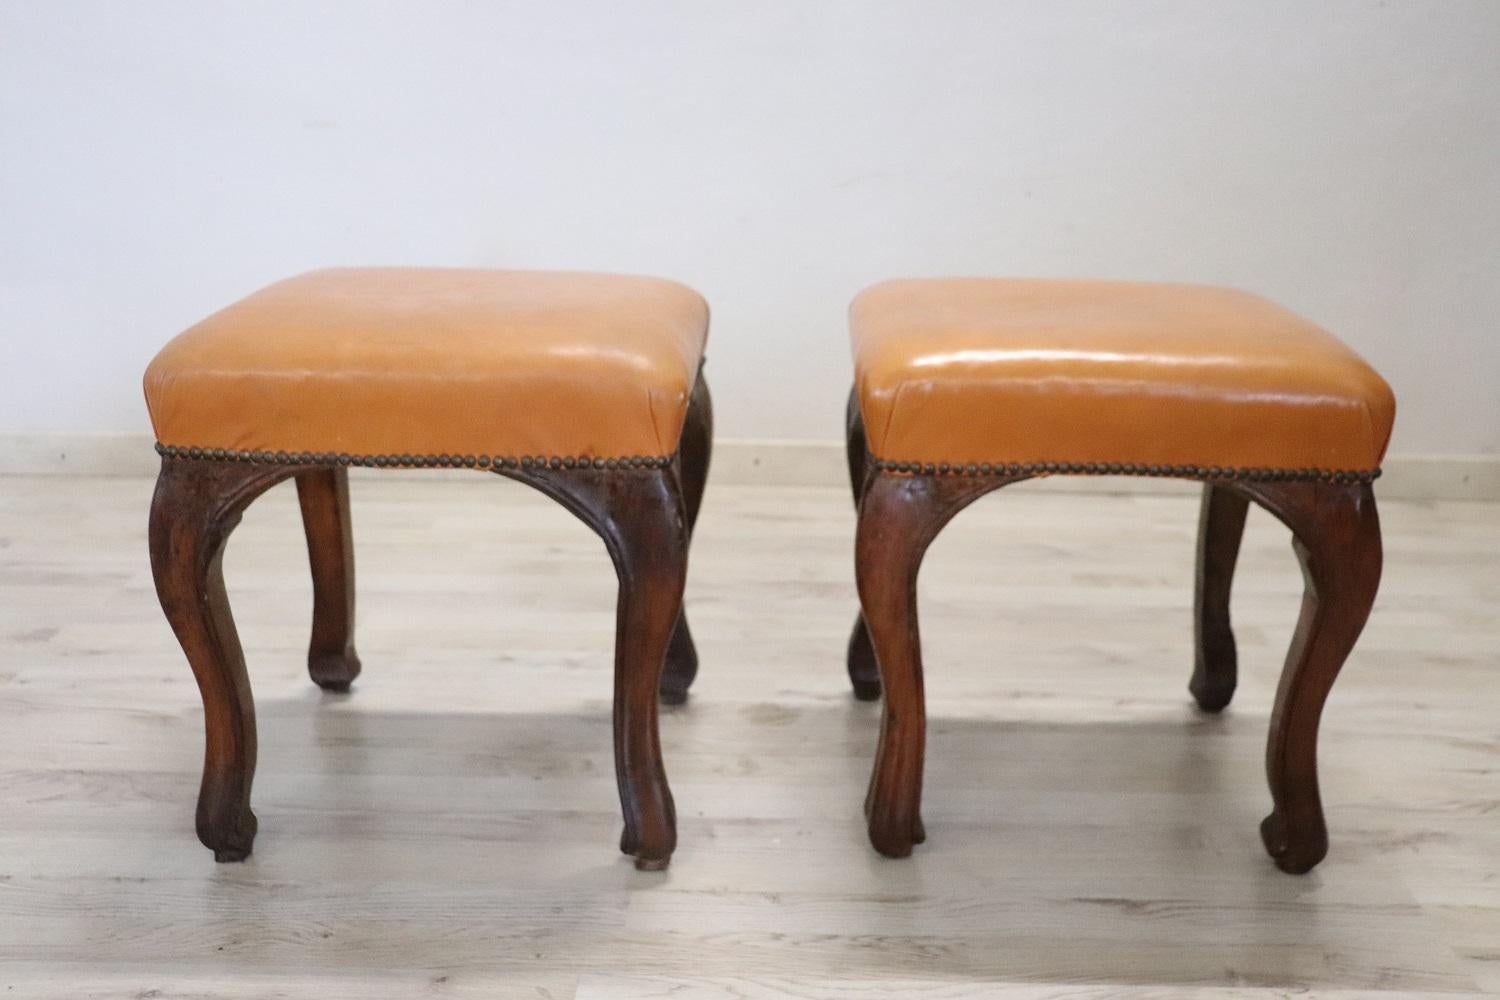 Beautiful and rare pair of 18th century antique stools. Made of walnut wood with light brown leather seat. Featuring sleek, wavy legs. Good condition to report some signs of wear in the leather.